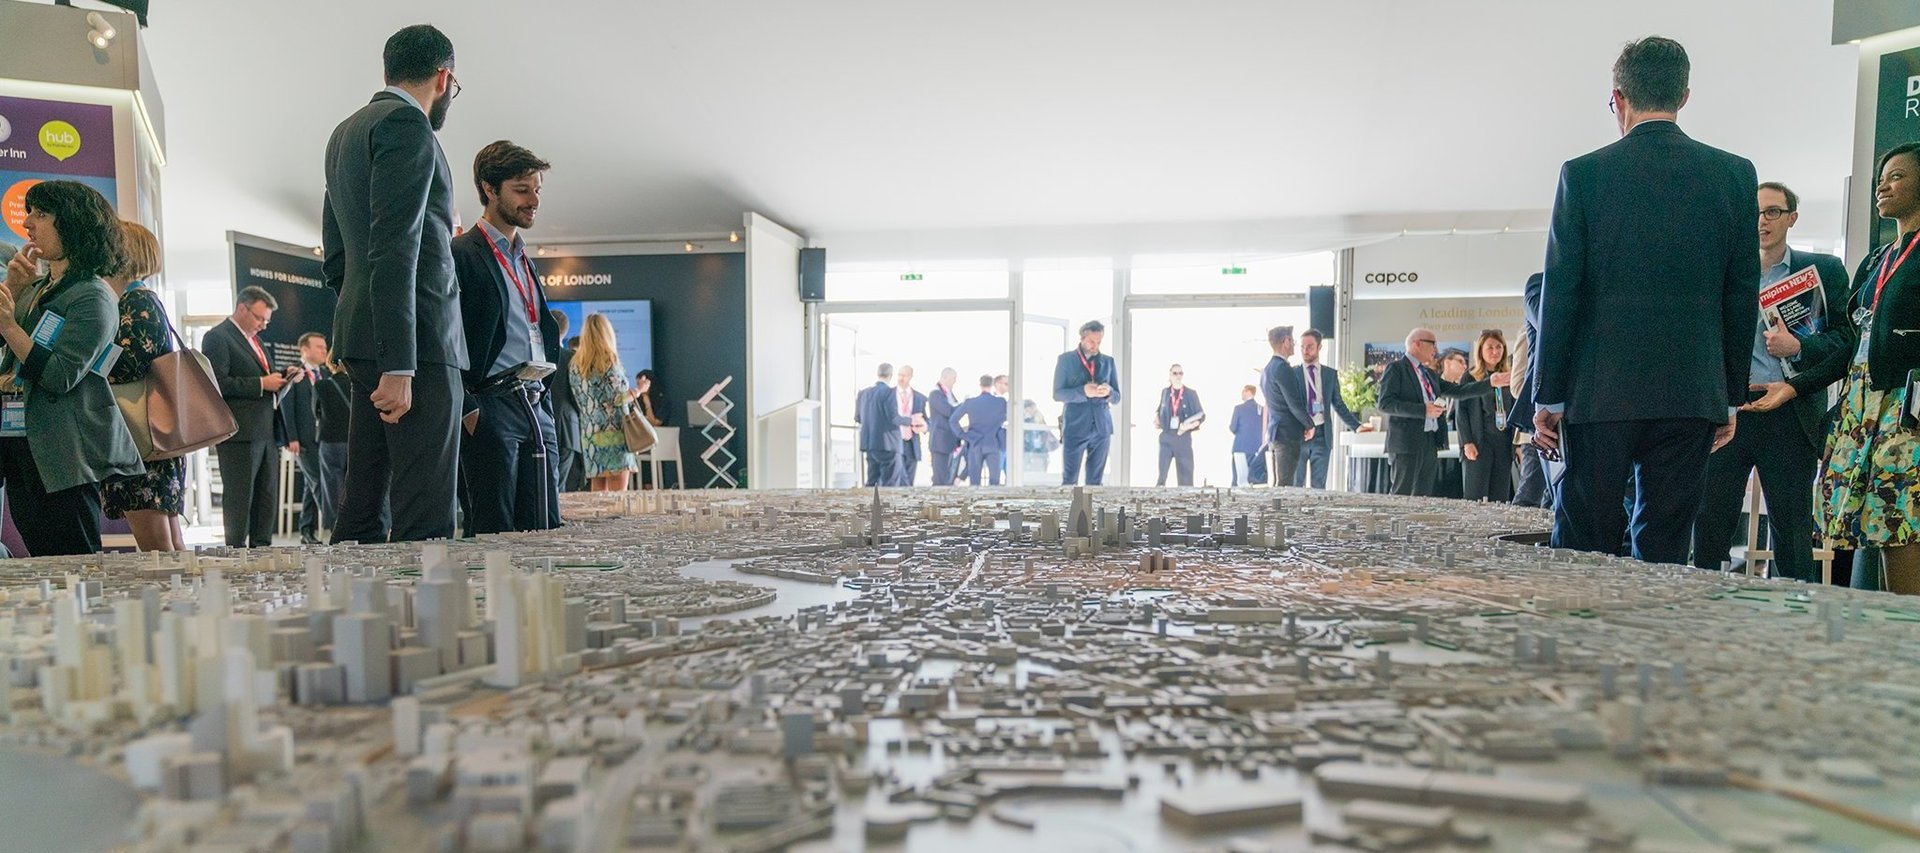 MIPIM conference delegates standing around a miniature model of London UK